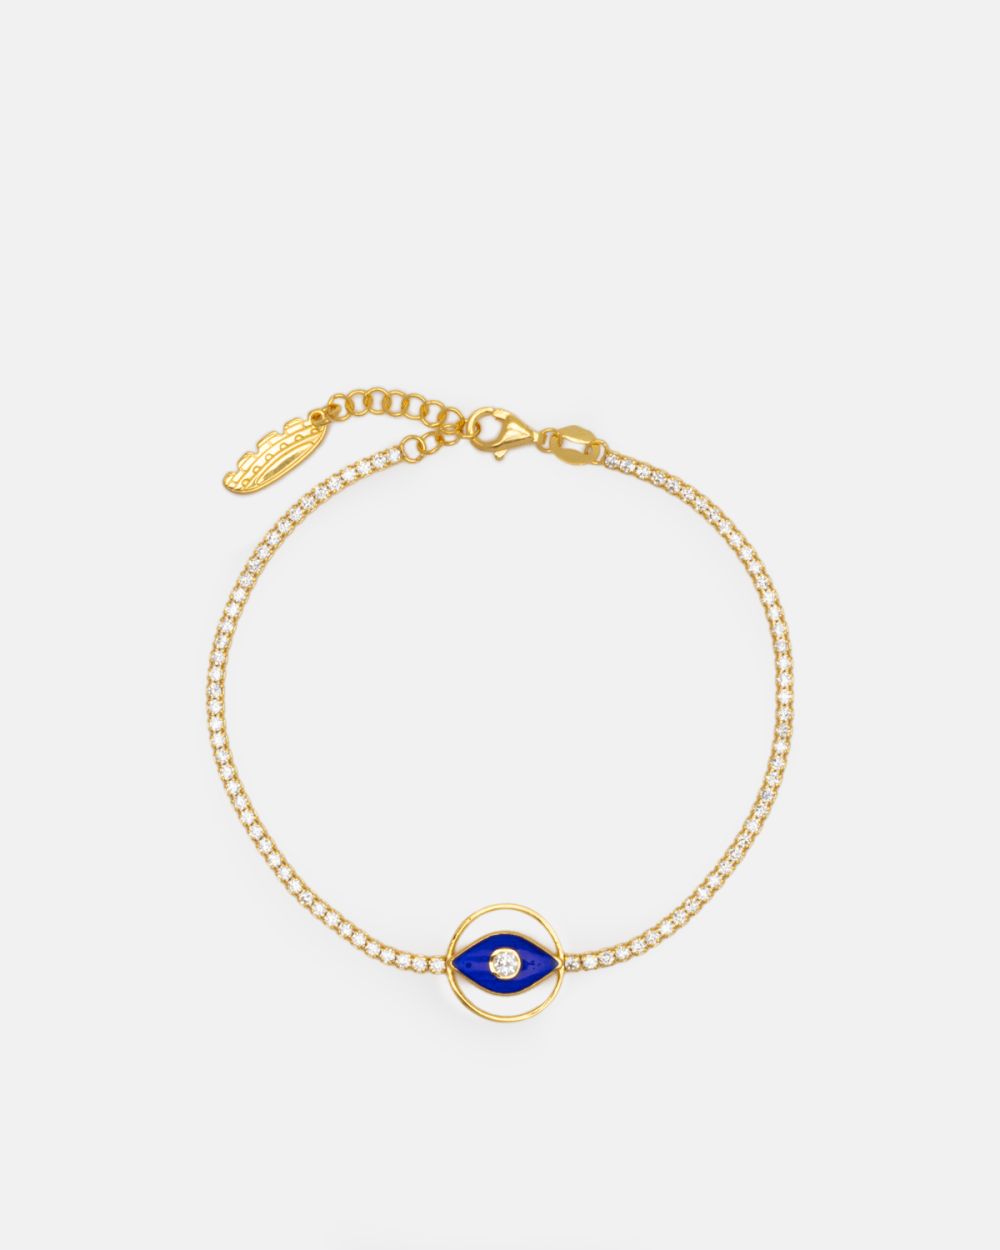 Luck Bracelet in Gold Plated Silver with Zirconias